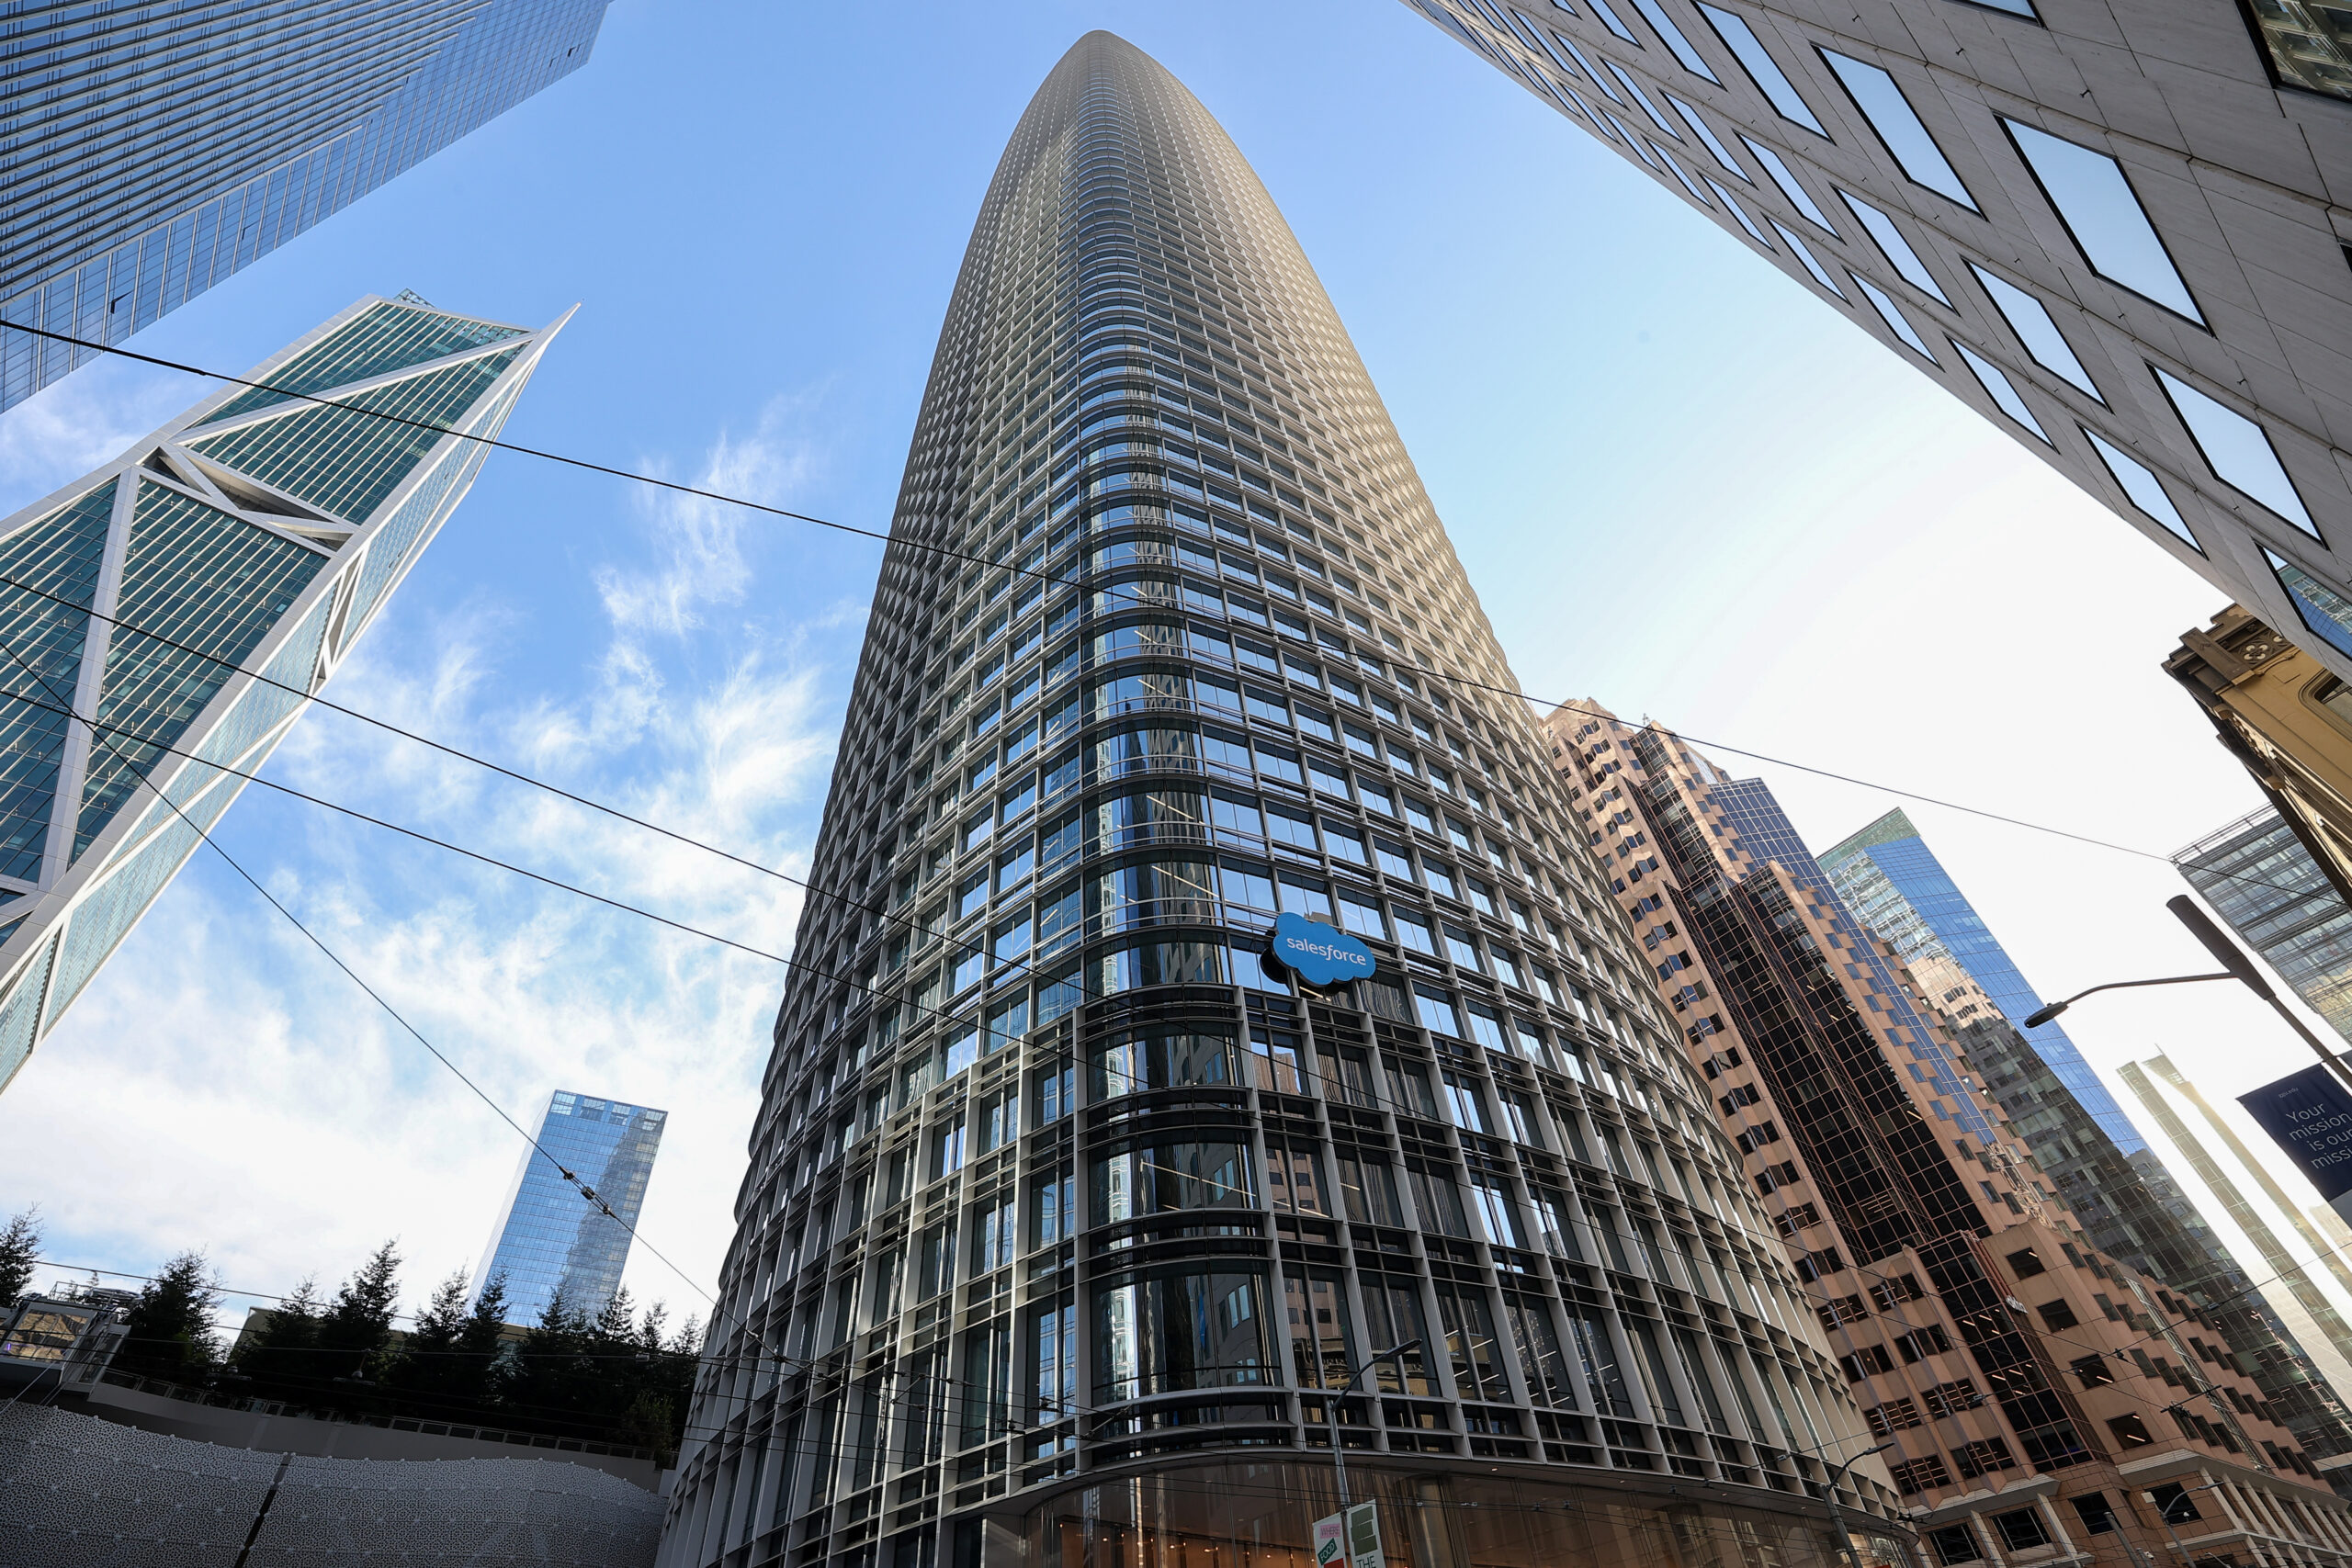 A view of Salesforce Tower, the largest high-rise in San Francisco, from street level.